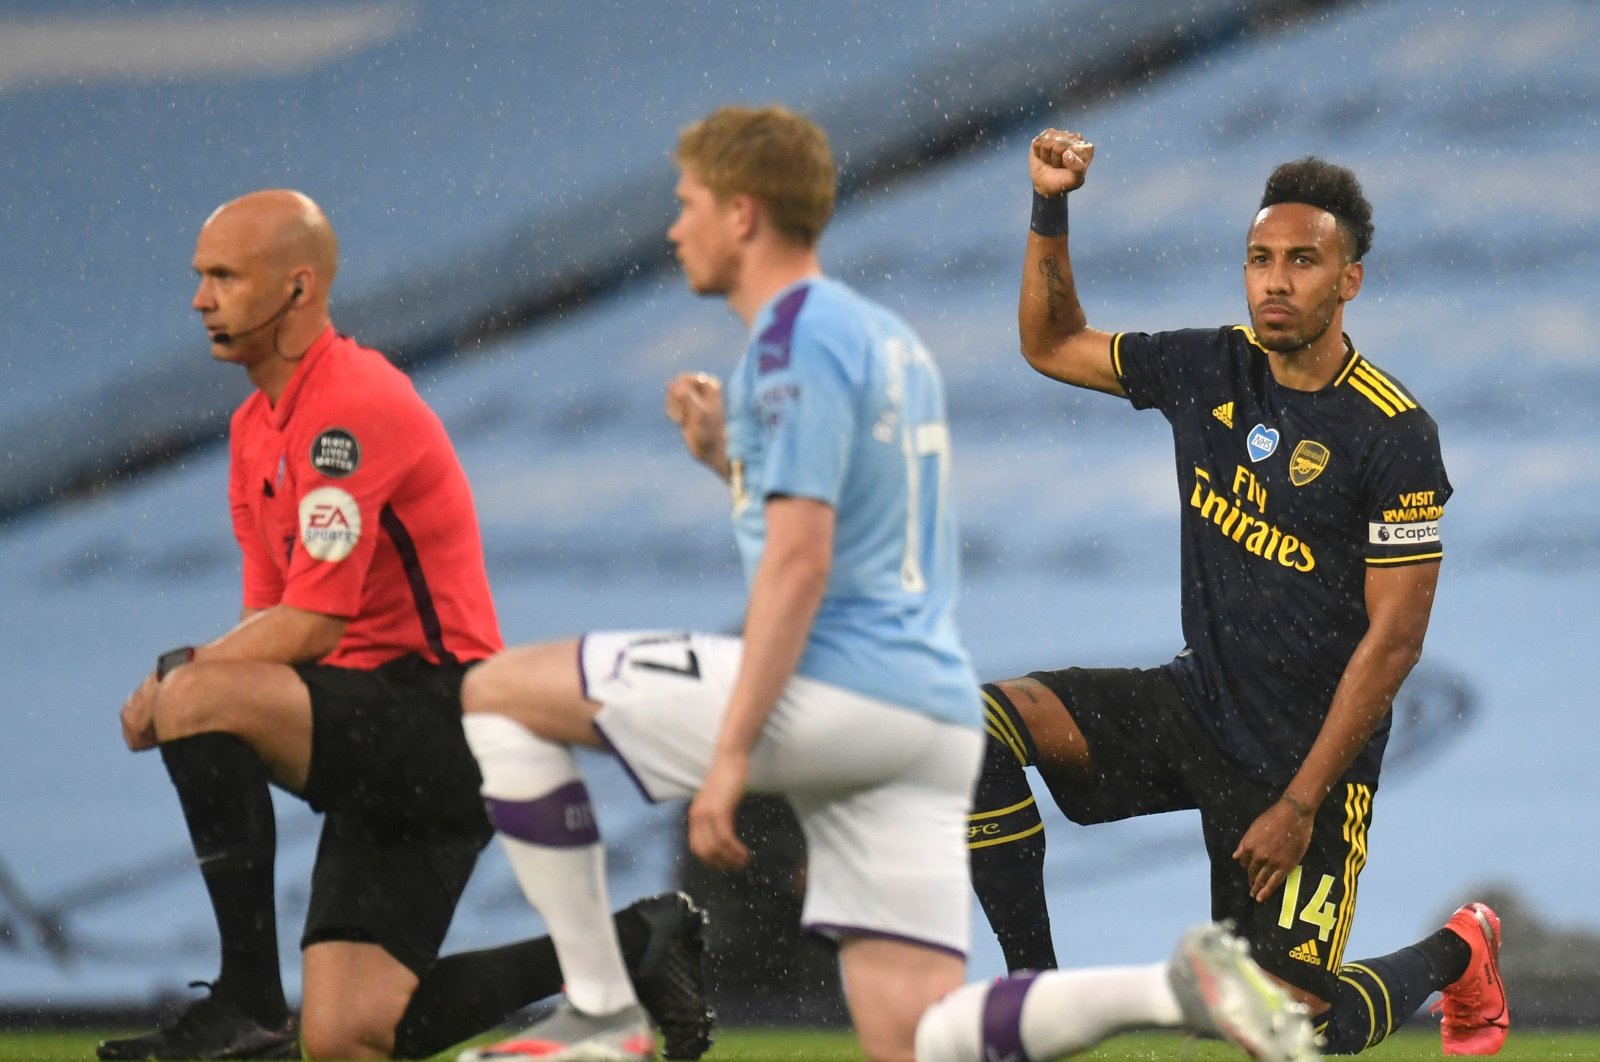 Arsenal's Gabonese striker Pierre-Emerick Aubameyang (R) takes a knee alongside Manchester City's Belgian midfielder Kevin De Bruyne (C) and Referee Anthony Taylor (L) ahead of the English Premier League football match between Manchester City and Arsenal at the Etihad Stadium in Manchester, northwest England, June 17, 2020. (AFP Photo)